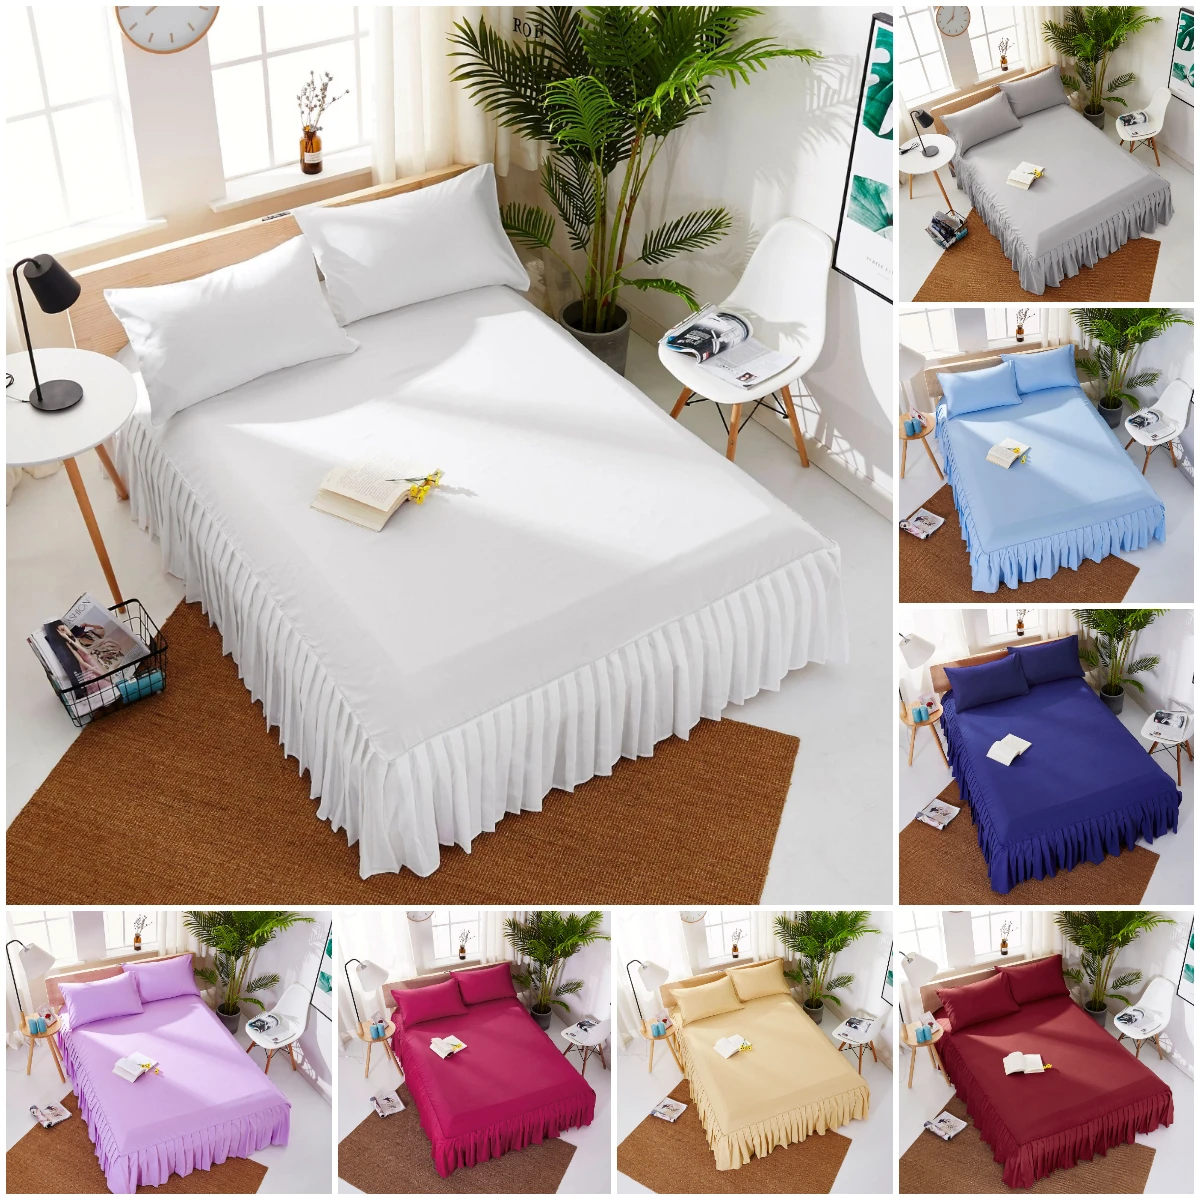 European Pure Color Bedspreads Bedskirt Bed Sheet Combined Bed Covers Super Soft Colchas Queen King Size Corchas Para La Cama